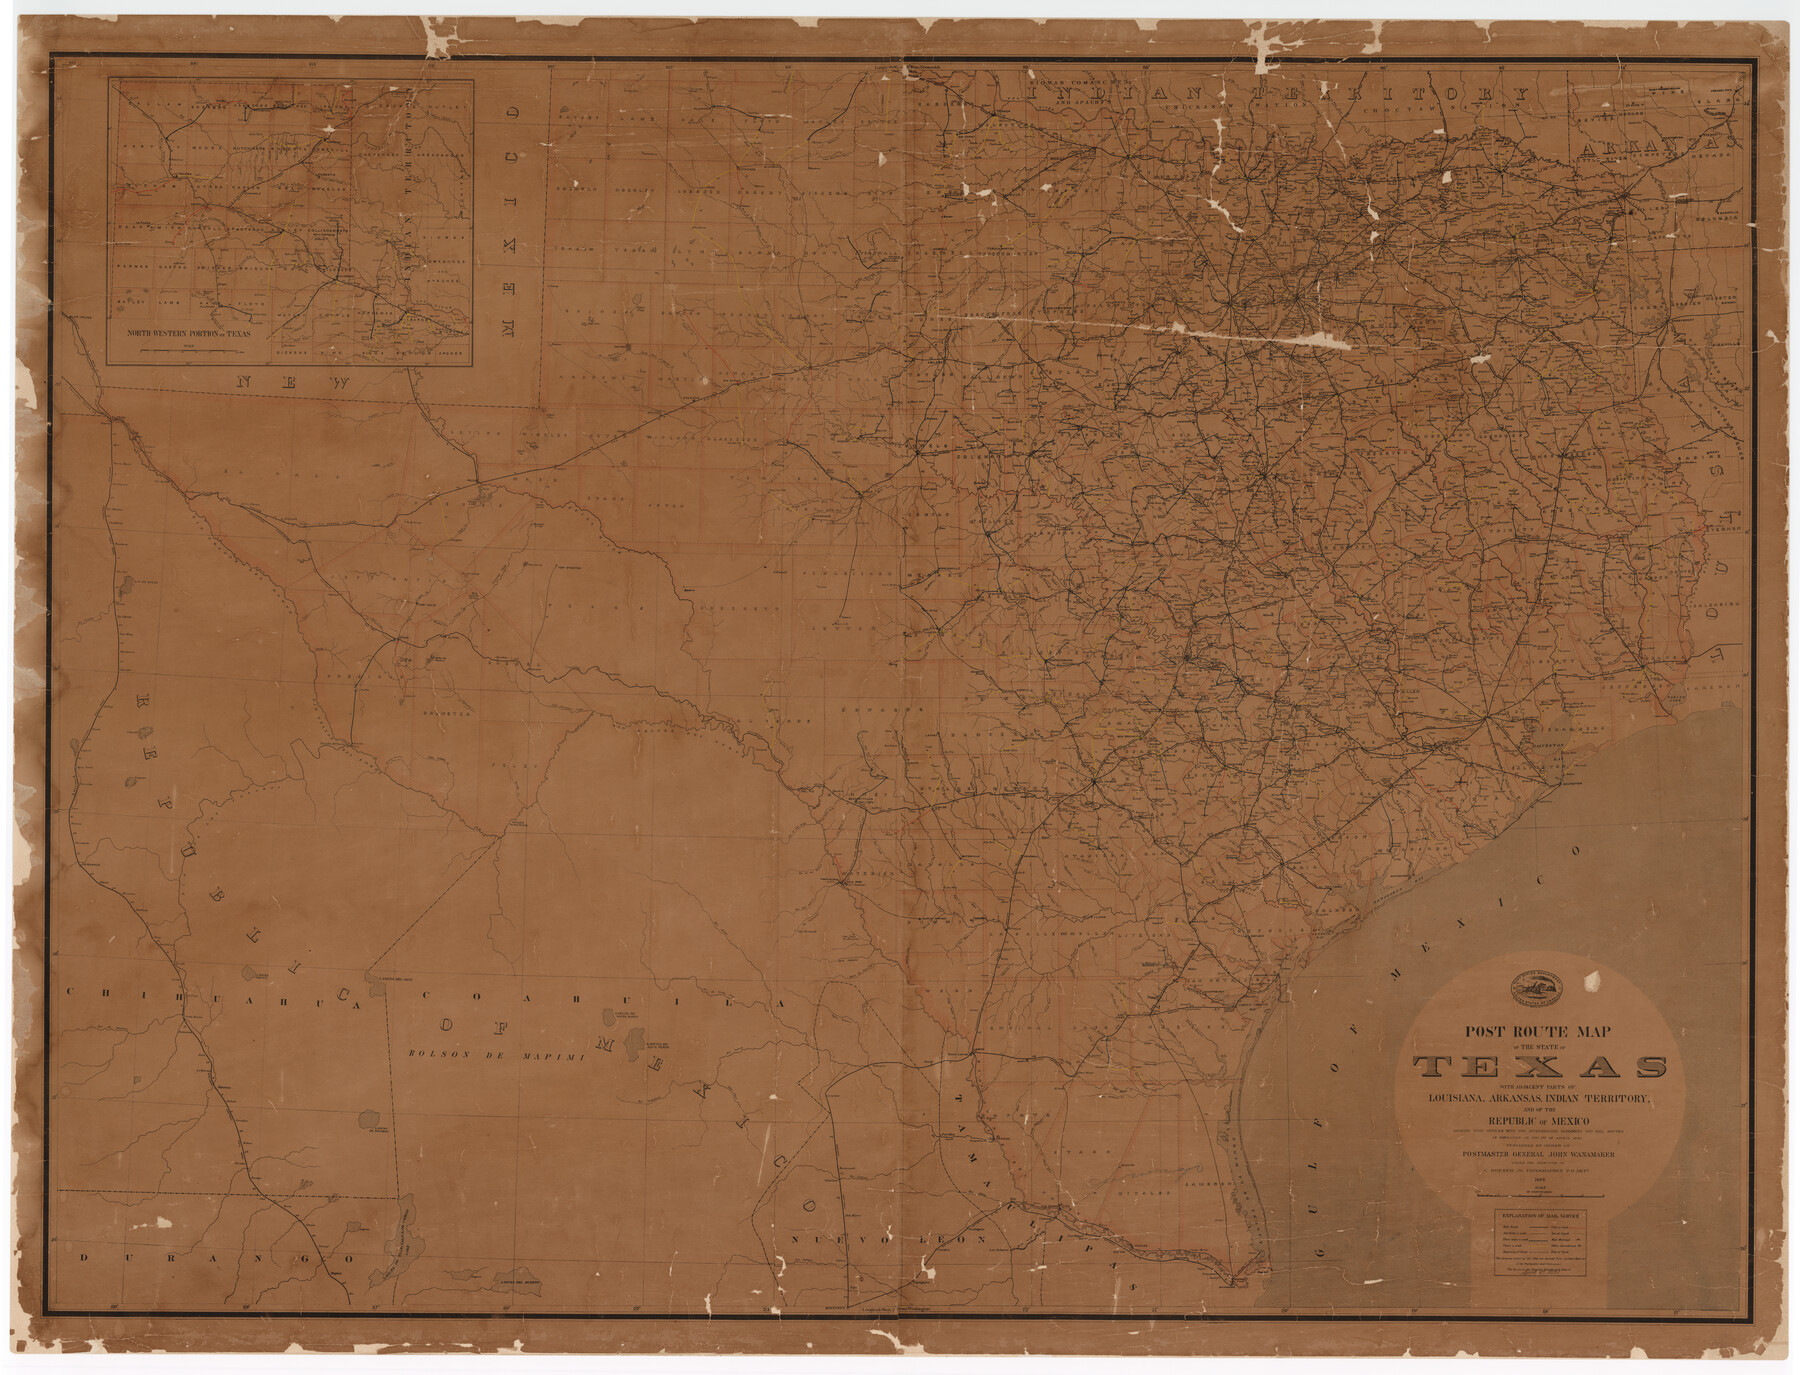 89061, Post Route Map of the State of Texas with Adjacent Parts of Louisiana, Arkansas, Indian Territory and the Republic of Mexico Showing Post Offices with the Intermediate Distances and Mail Routes in Operation on the 1st of April 1891, Texas State Library and Archives